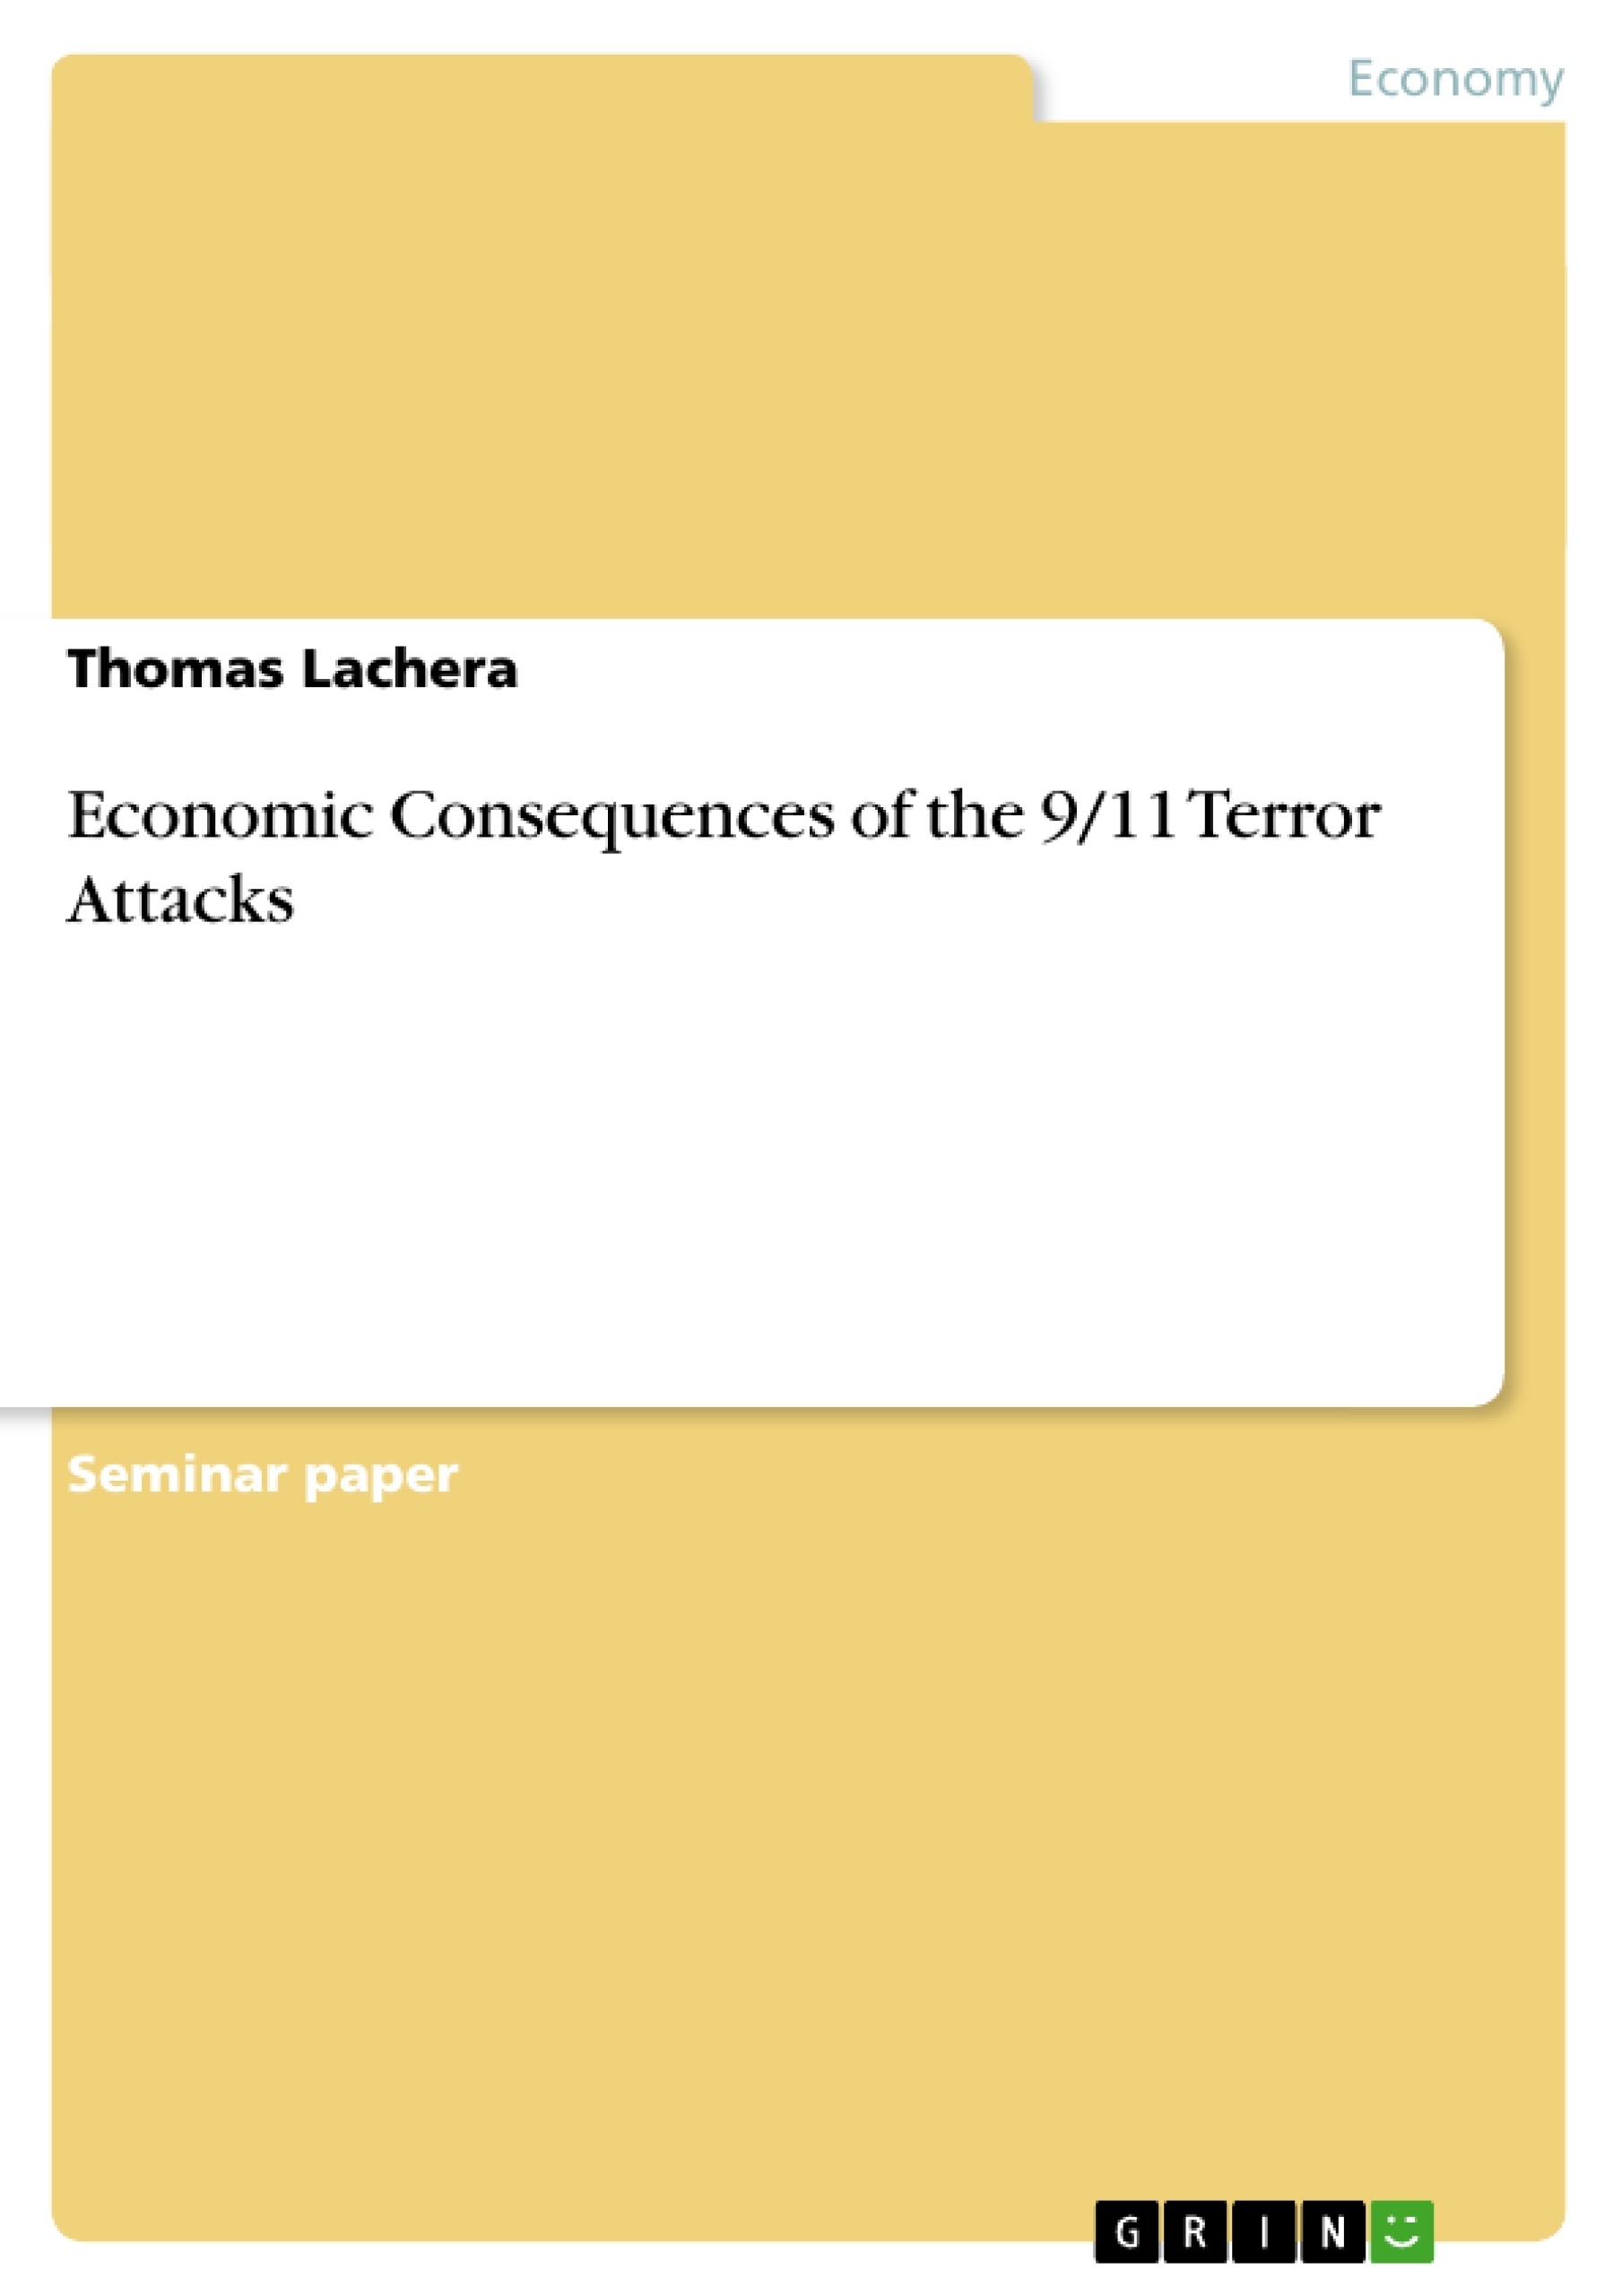 Title: Economic Consequences of the 9/11 Terror Attacks